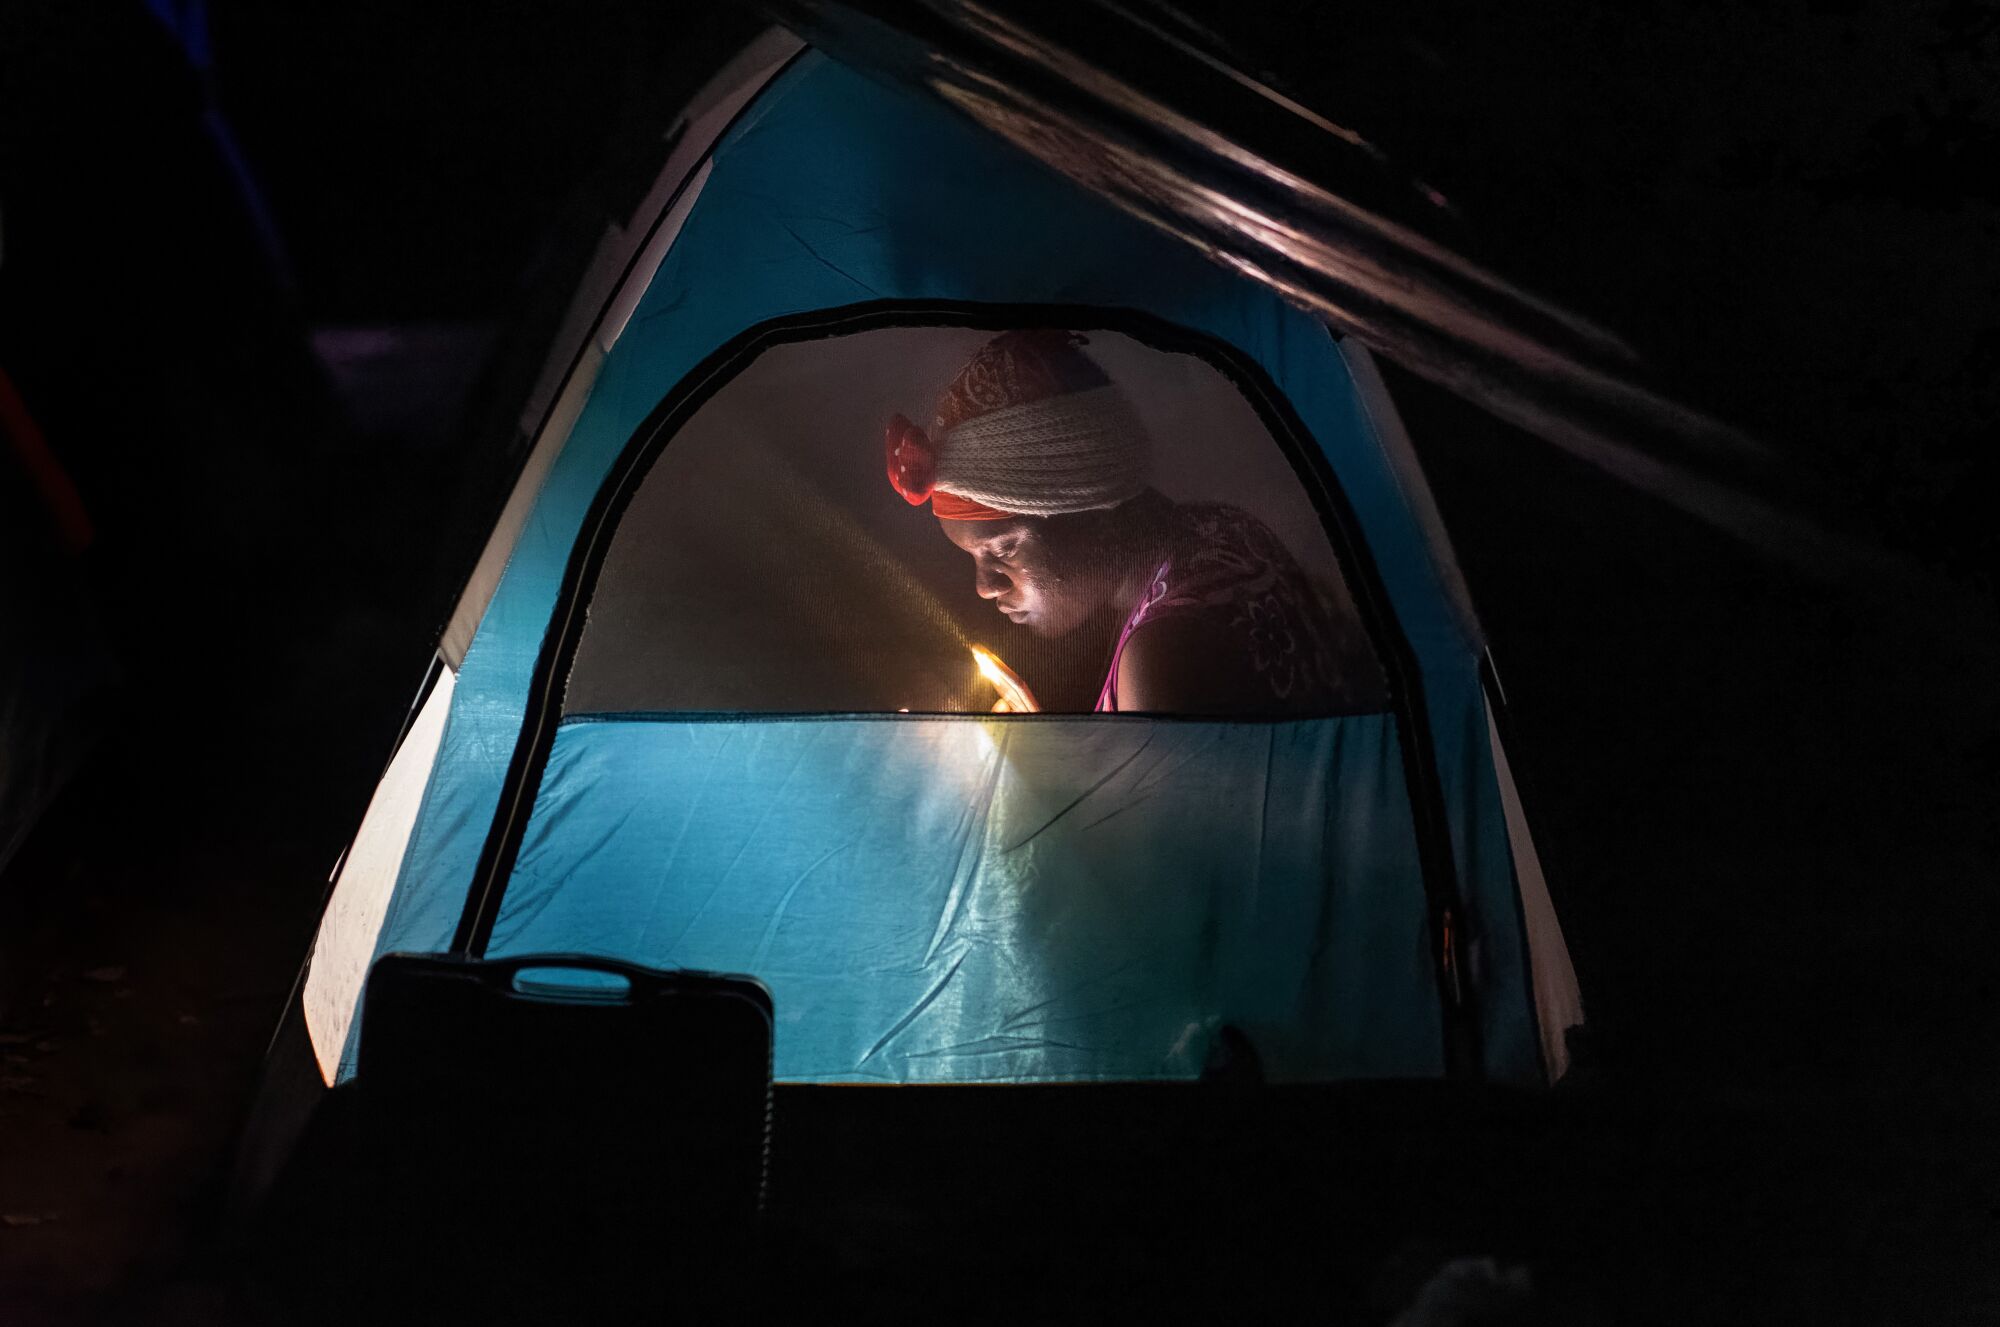 A Haitian immigrant is seen through the window of a tent at night.